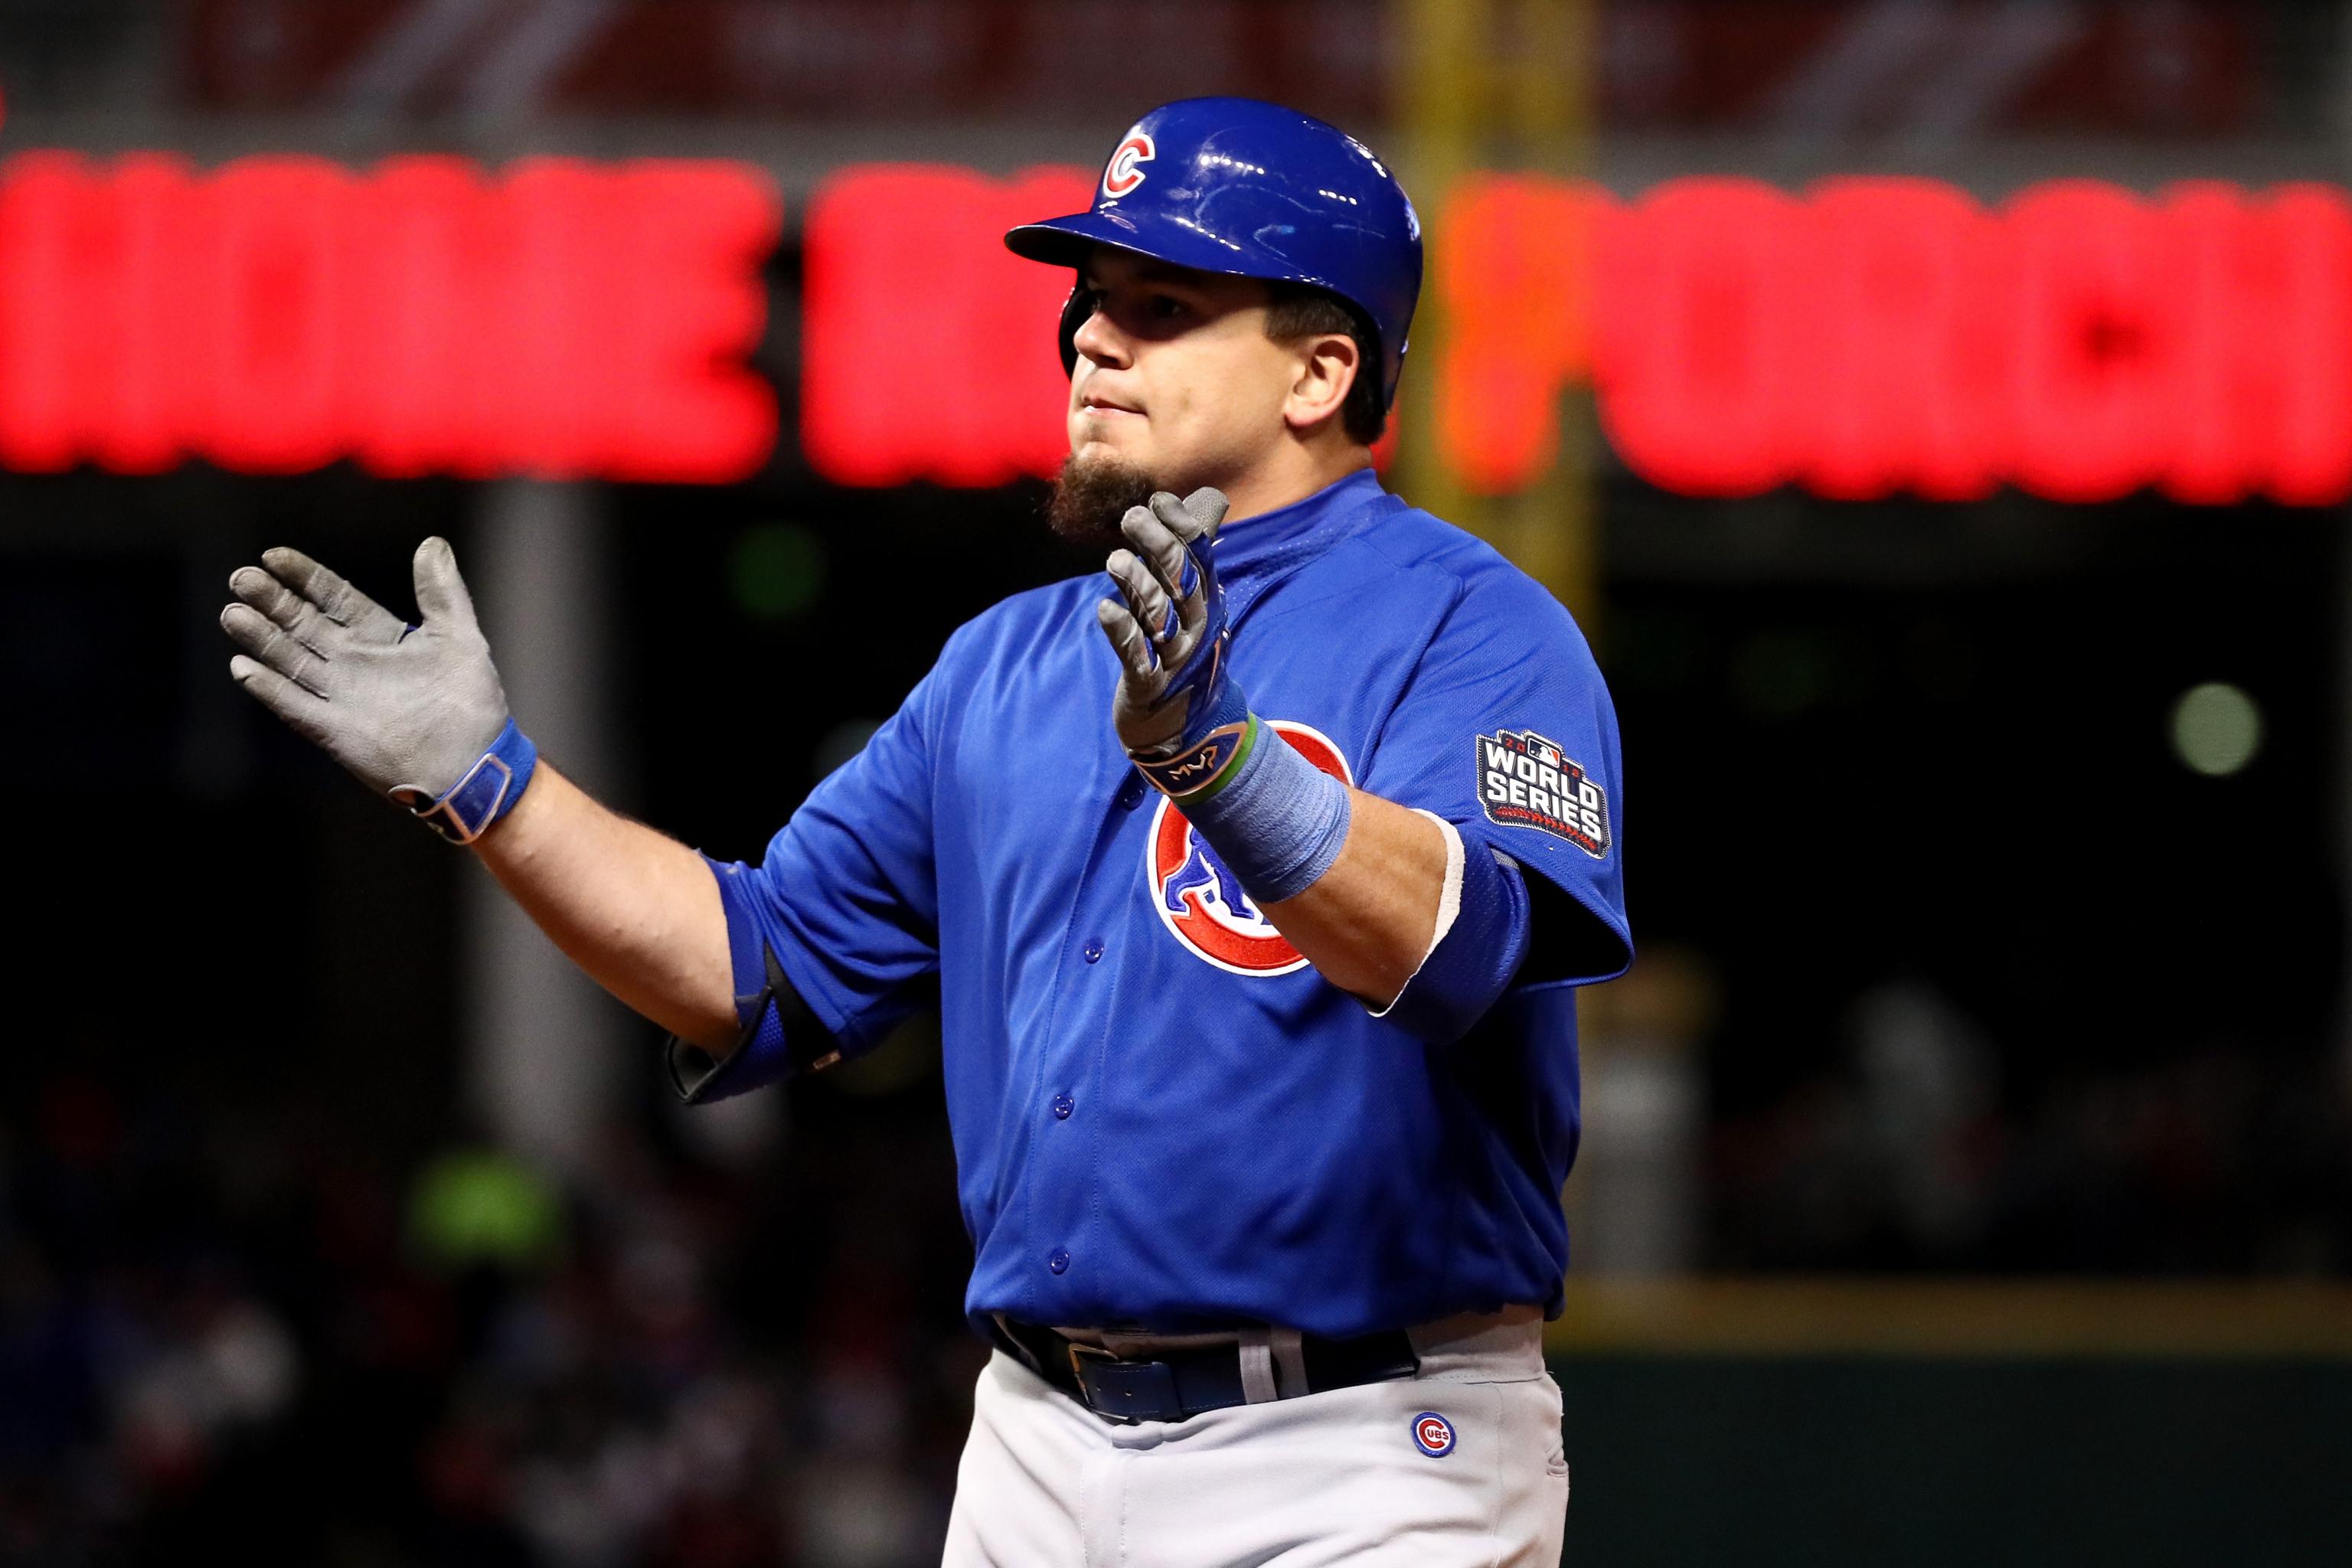 OCT 26, 2016: Chicago Cubs left fielder Kyle Schwarber (12) reacts after a  base hit during Game 2 of the 2016 World Series against the Chicago Cubs  and the Cleveland Indians at